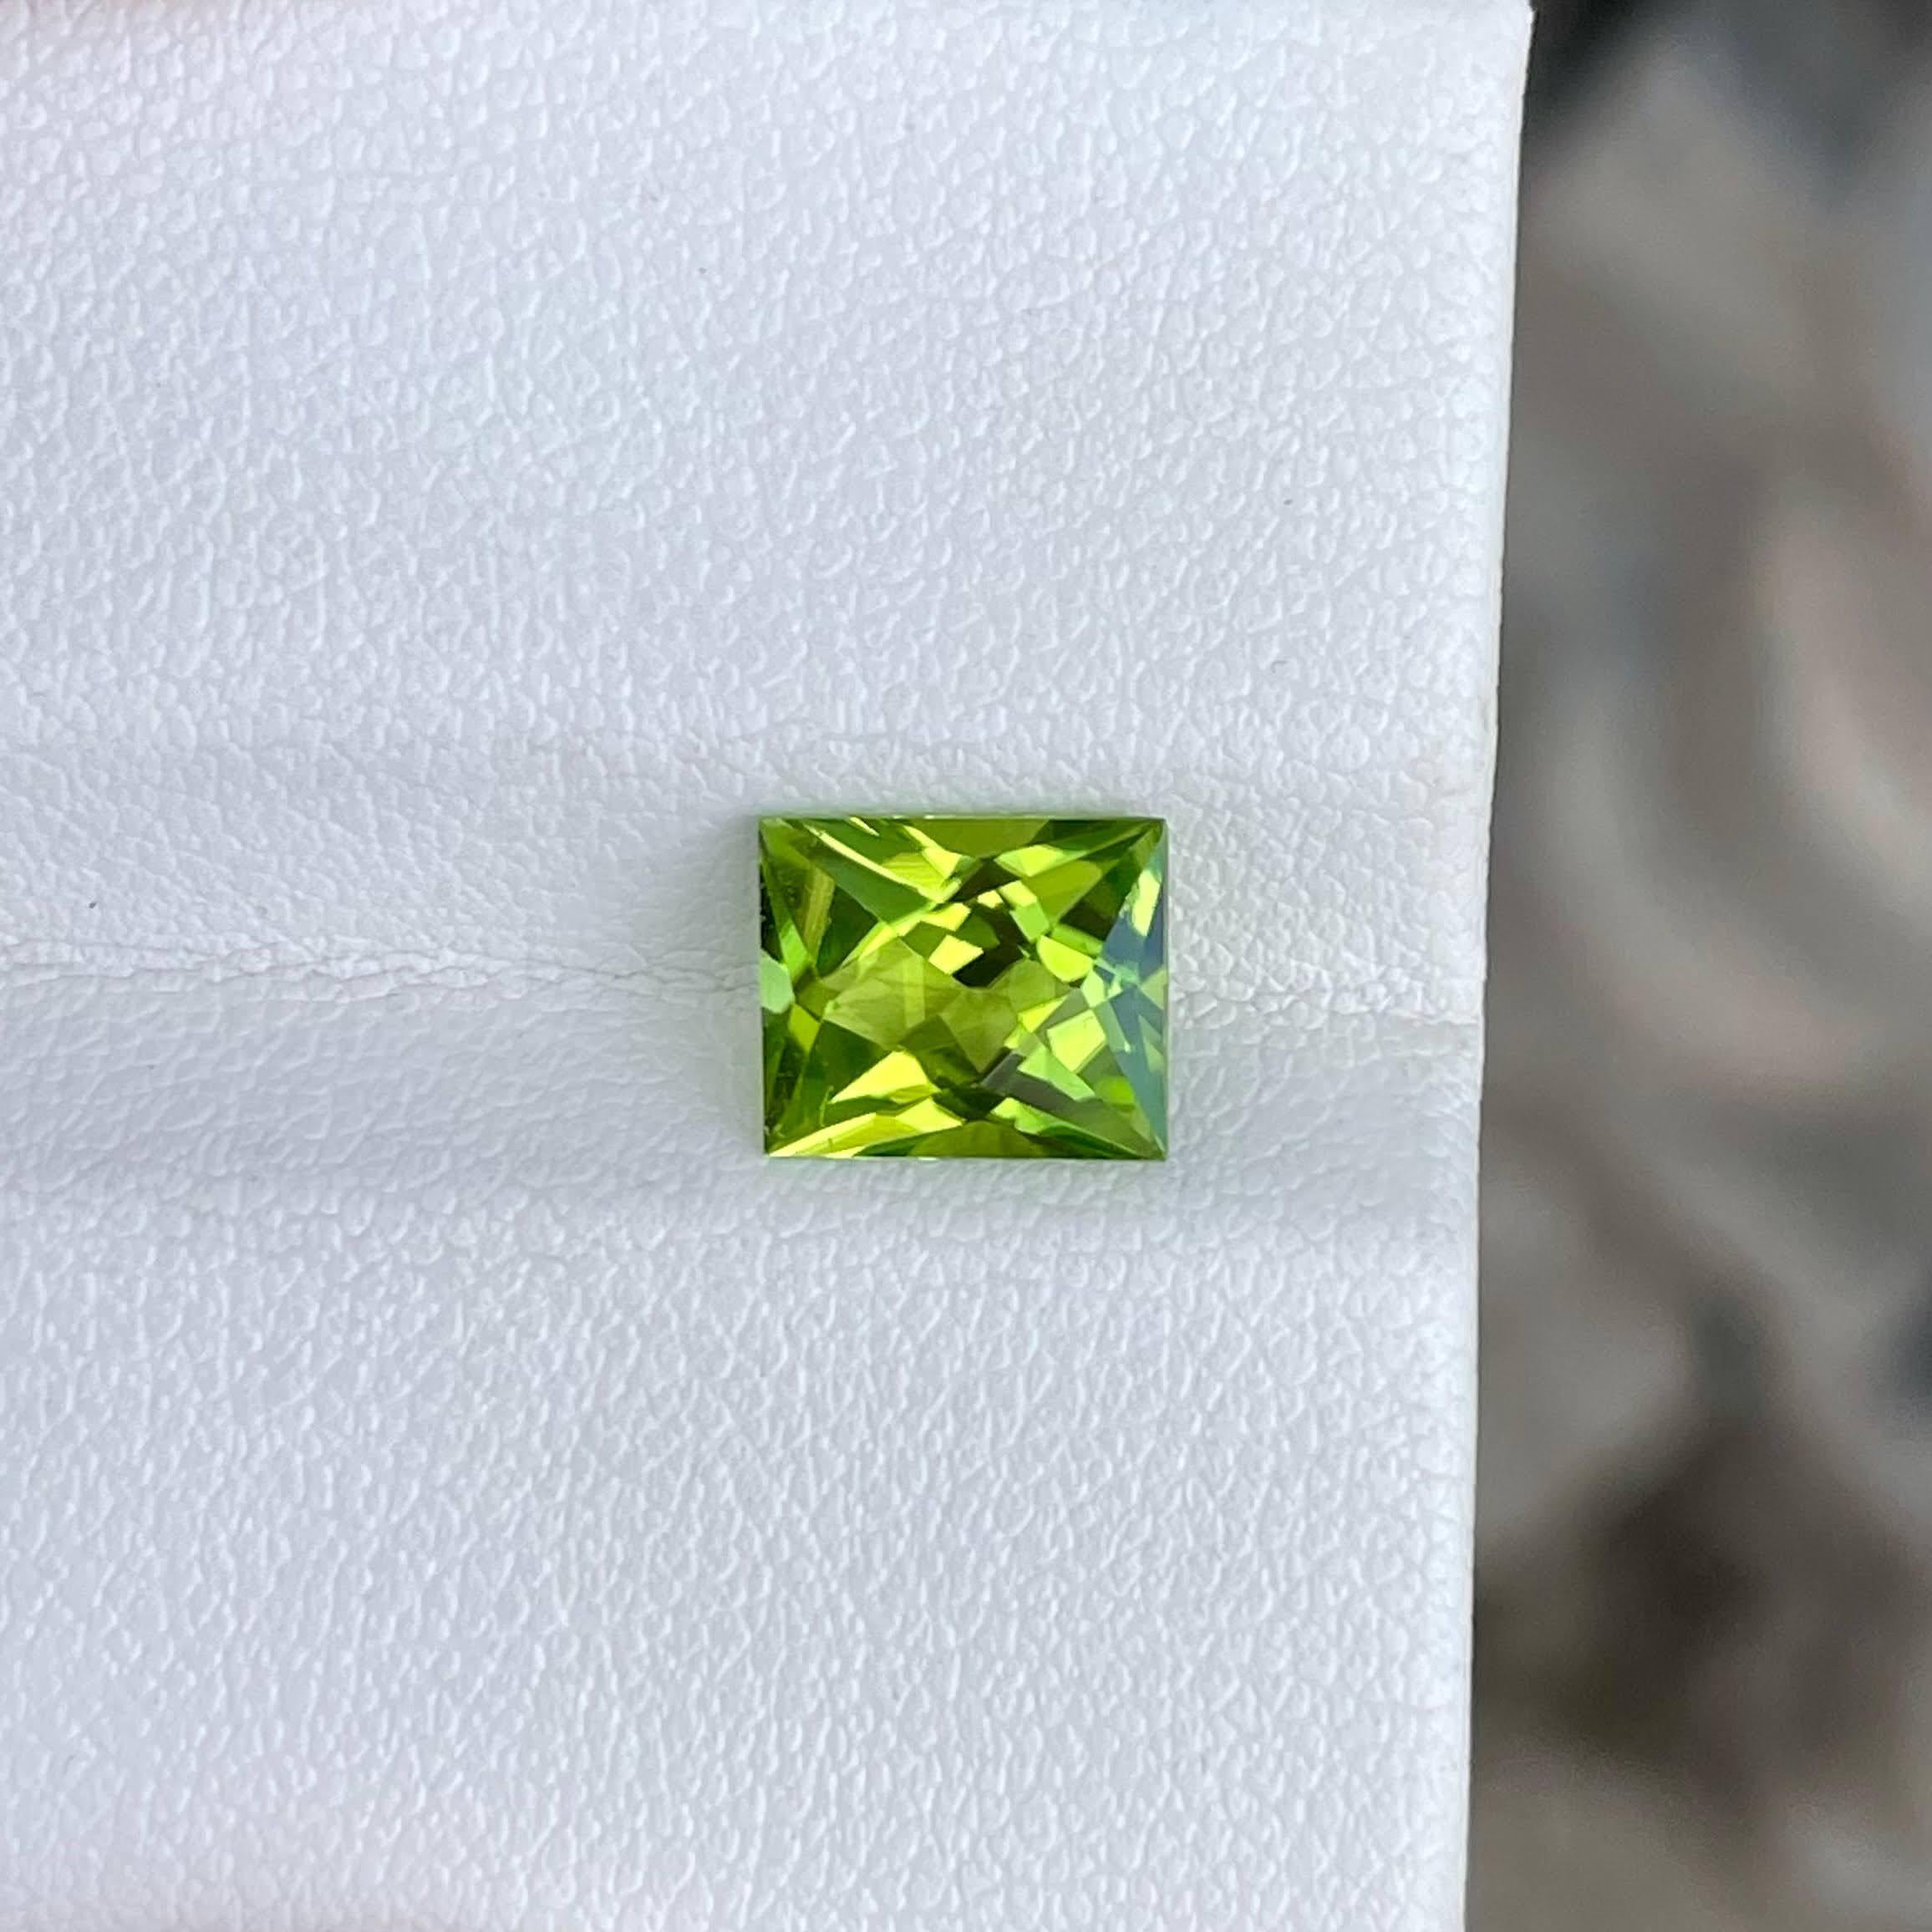 Weight 2.40 carats 
Dimensions 8.4x7.1x5.1 mm
Treatment none 
Origin Pakistan 
Clarity VVS
Shape rectangular
Cut scissor




The 2.40-carat Green Peridot Stone is a captivating natural Pakistani gemstone renowned for its exquisite beauty and unique